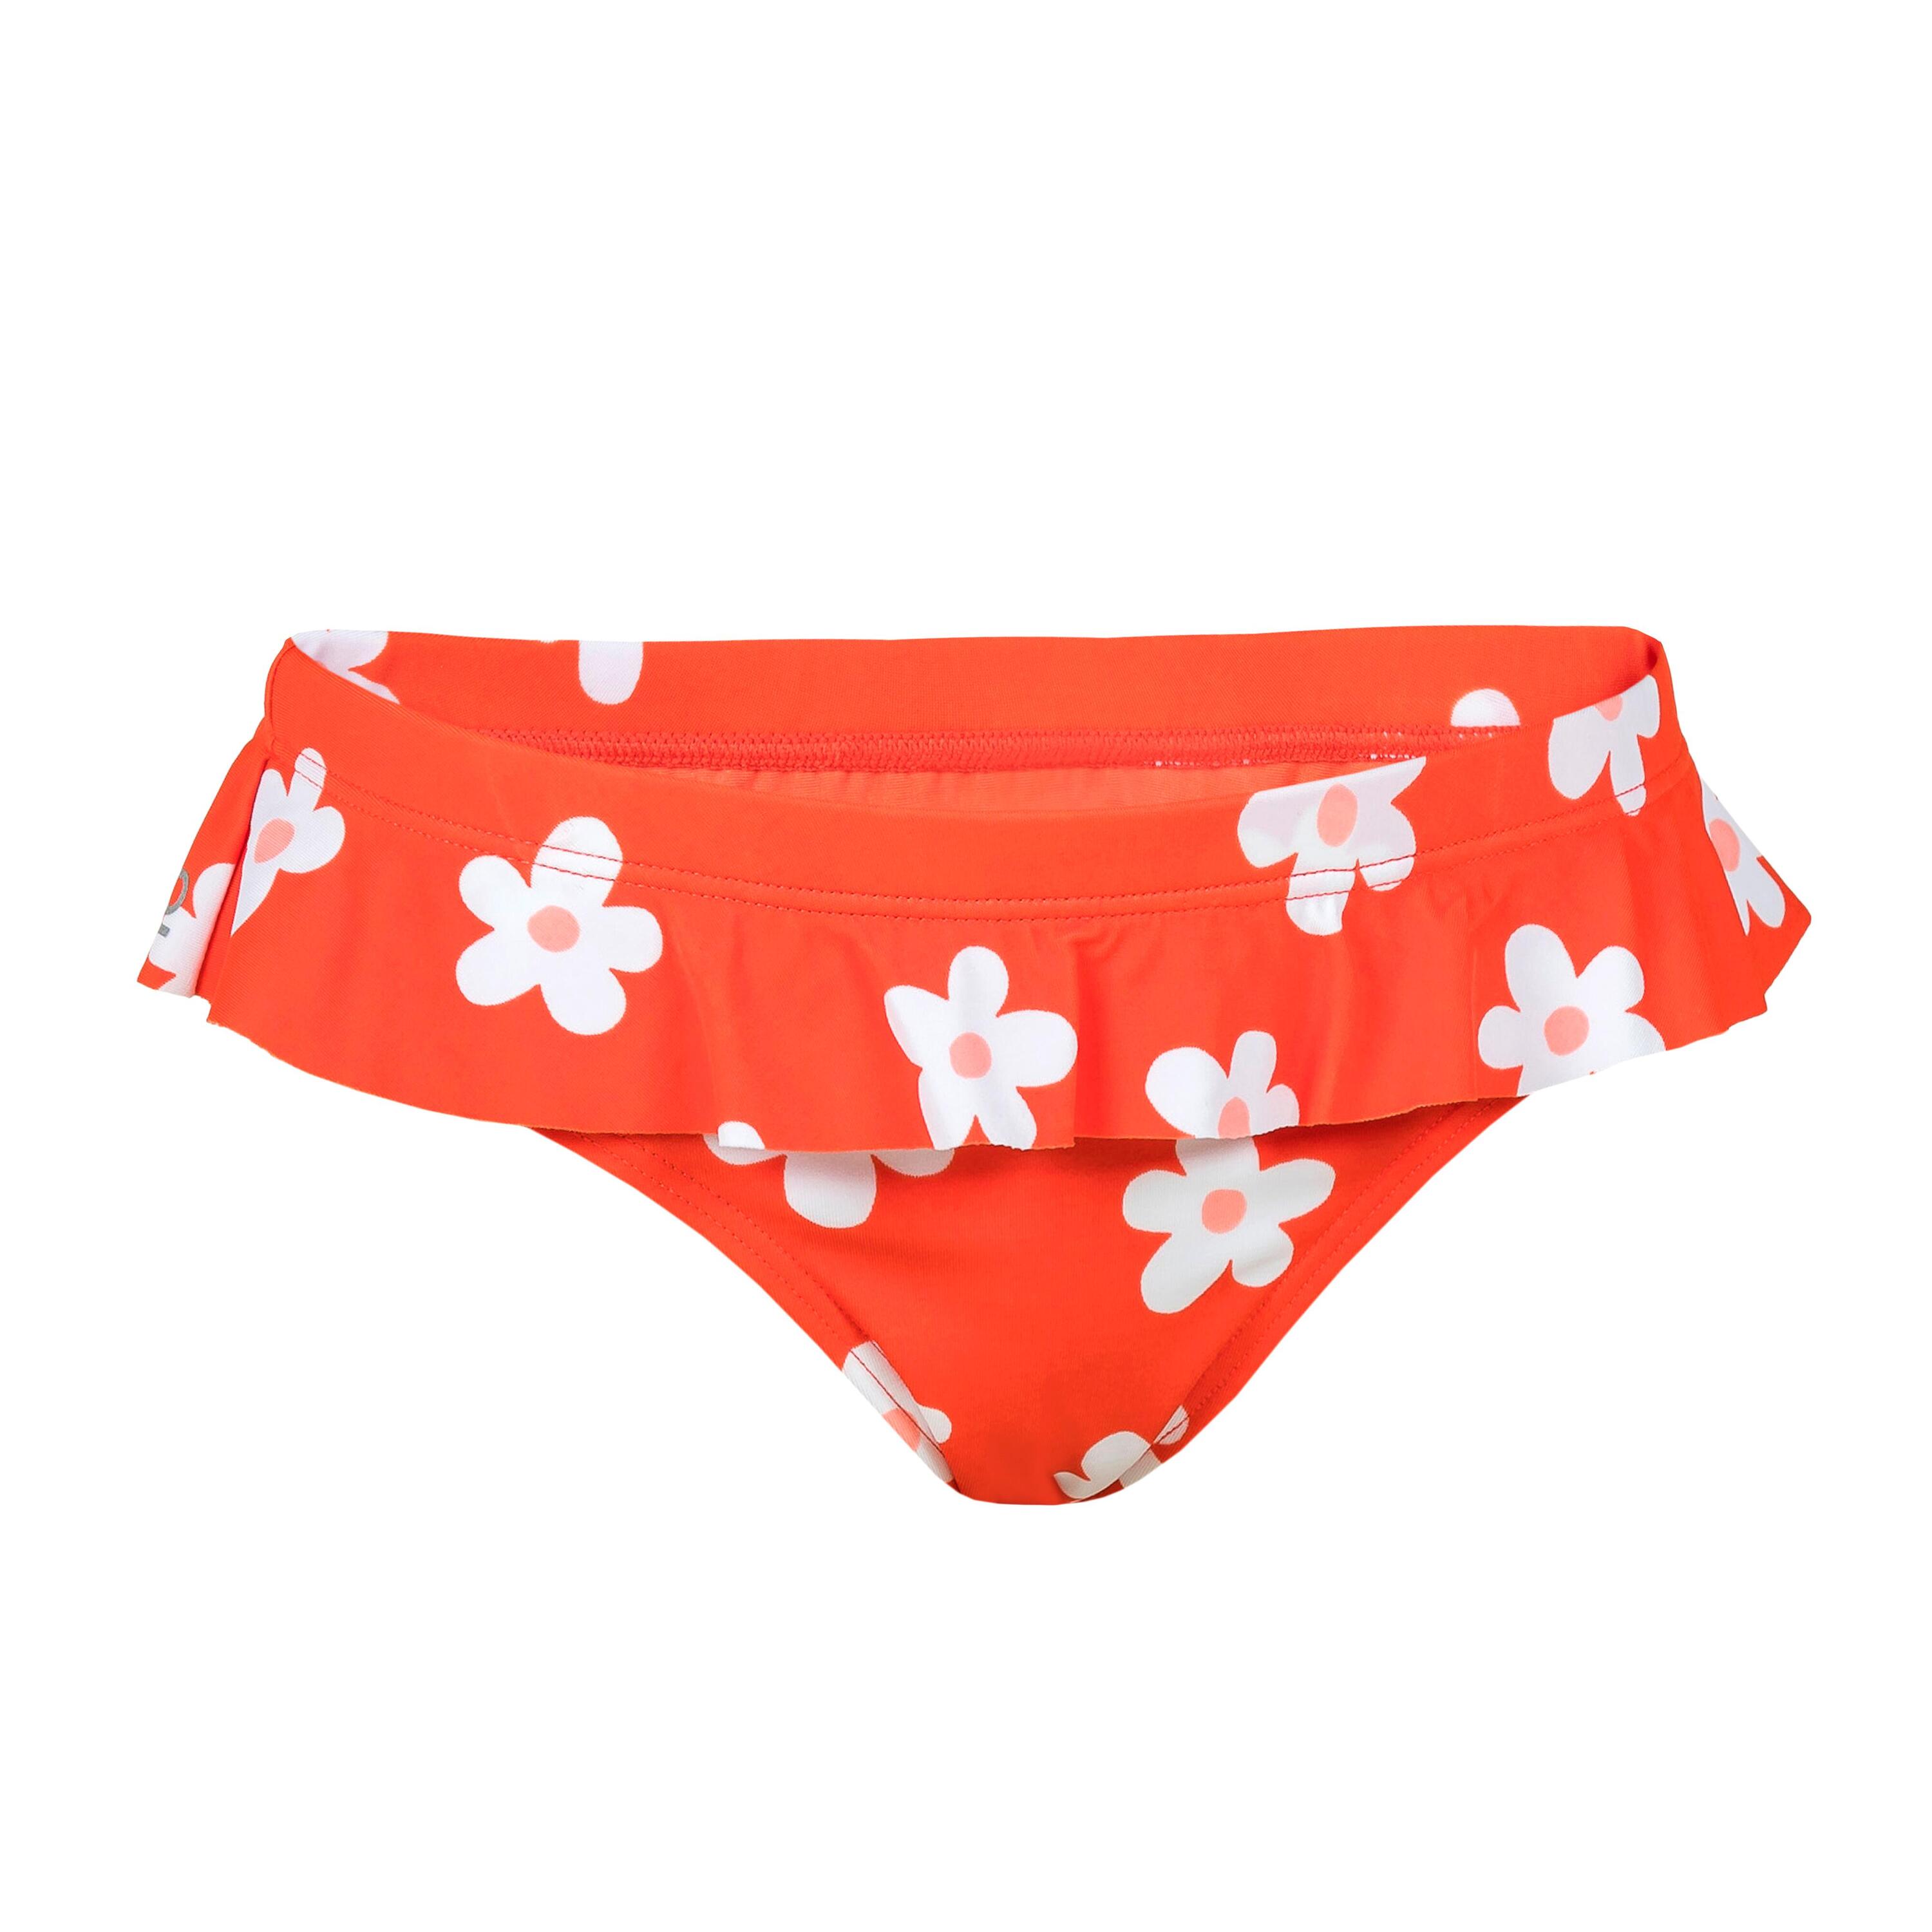 Girls' Swimming Swimsuit Bottoms Lila Marg Red 2/2